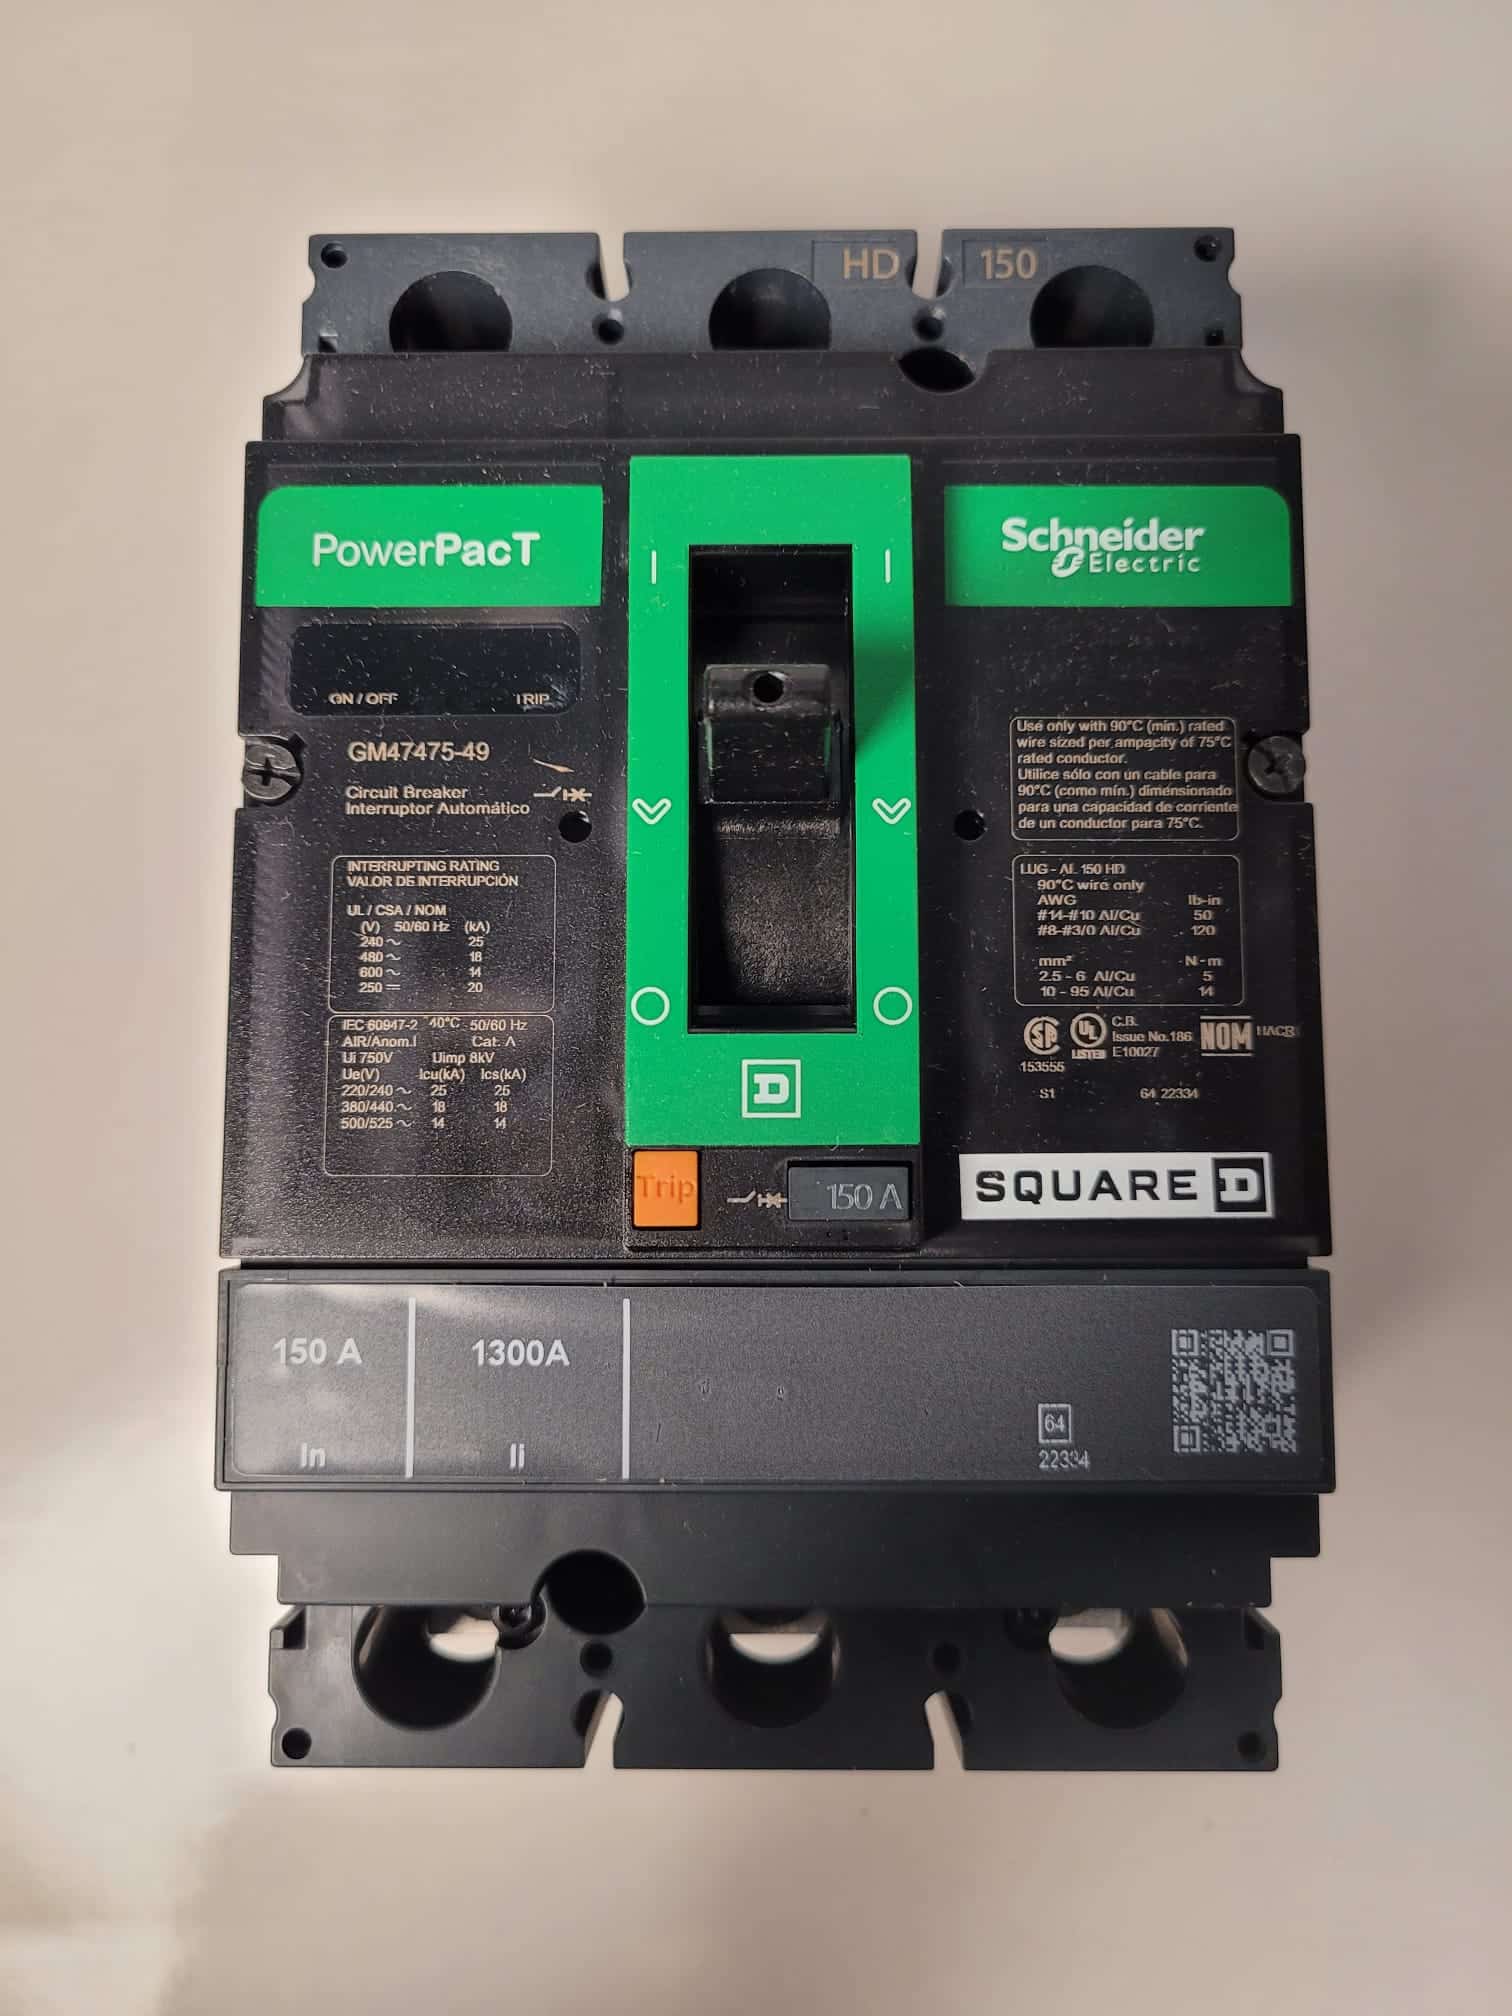 New 150 Amp Square D PowerPacT HDP36150CTX Breaker (25 Available)